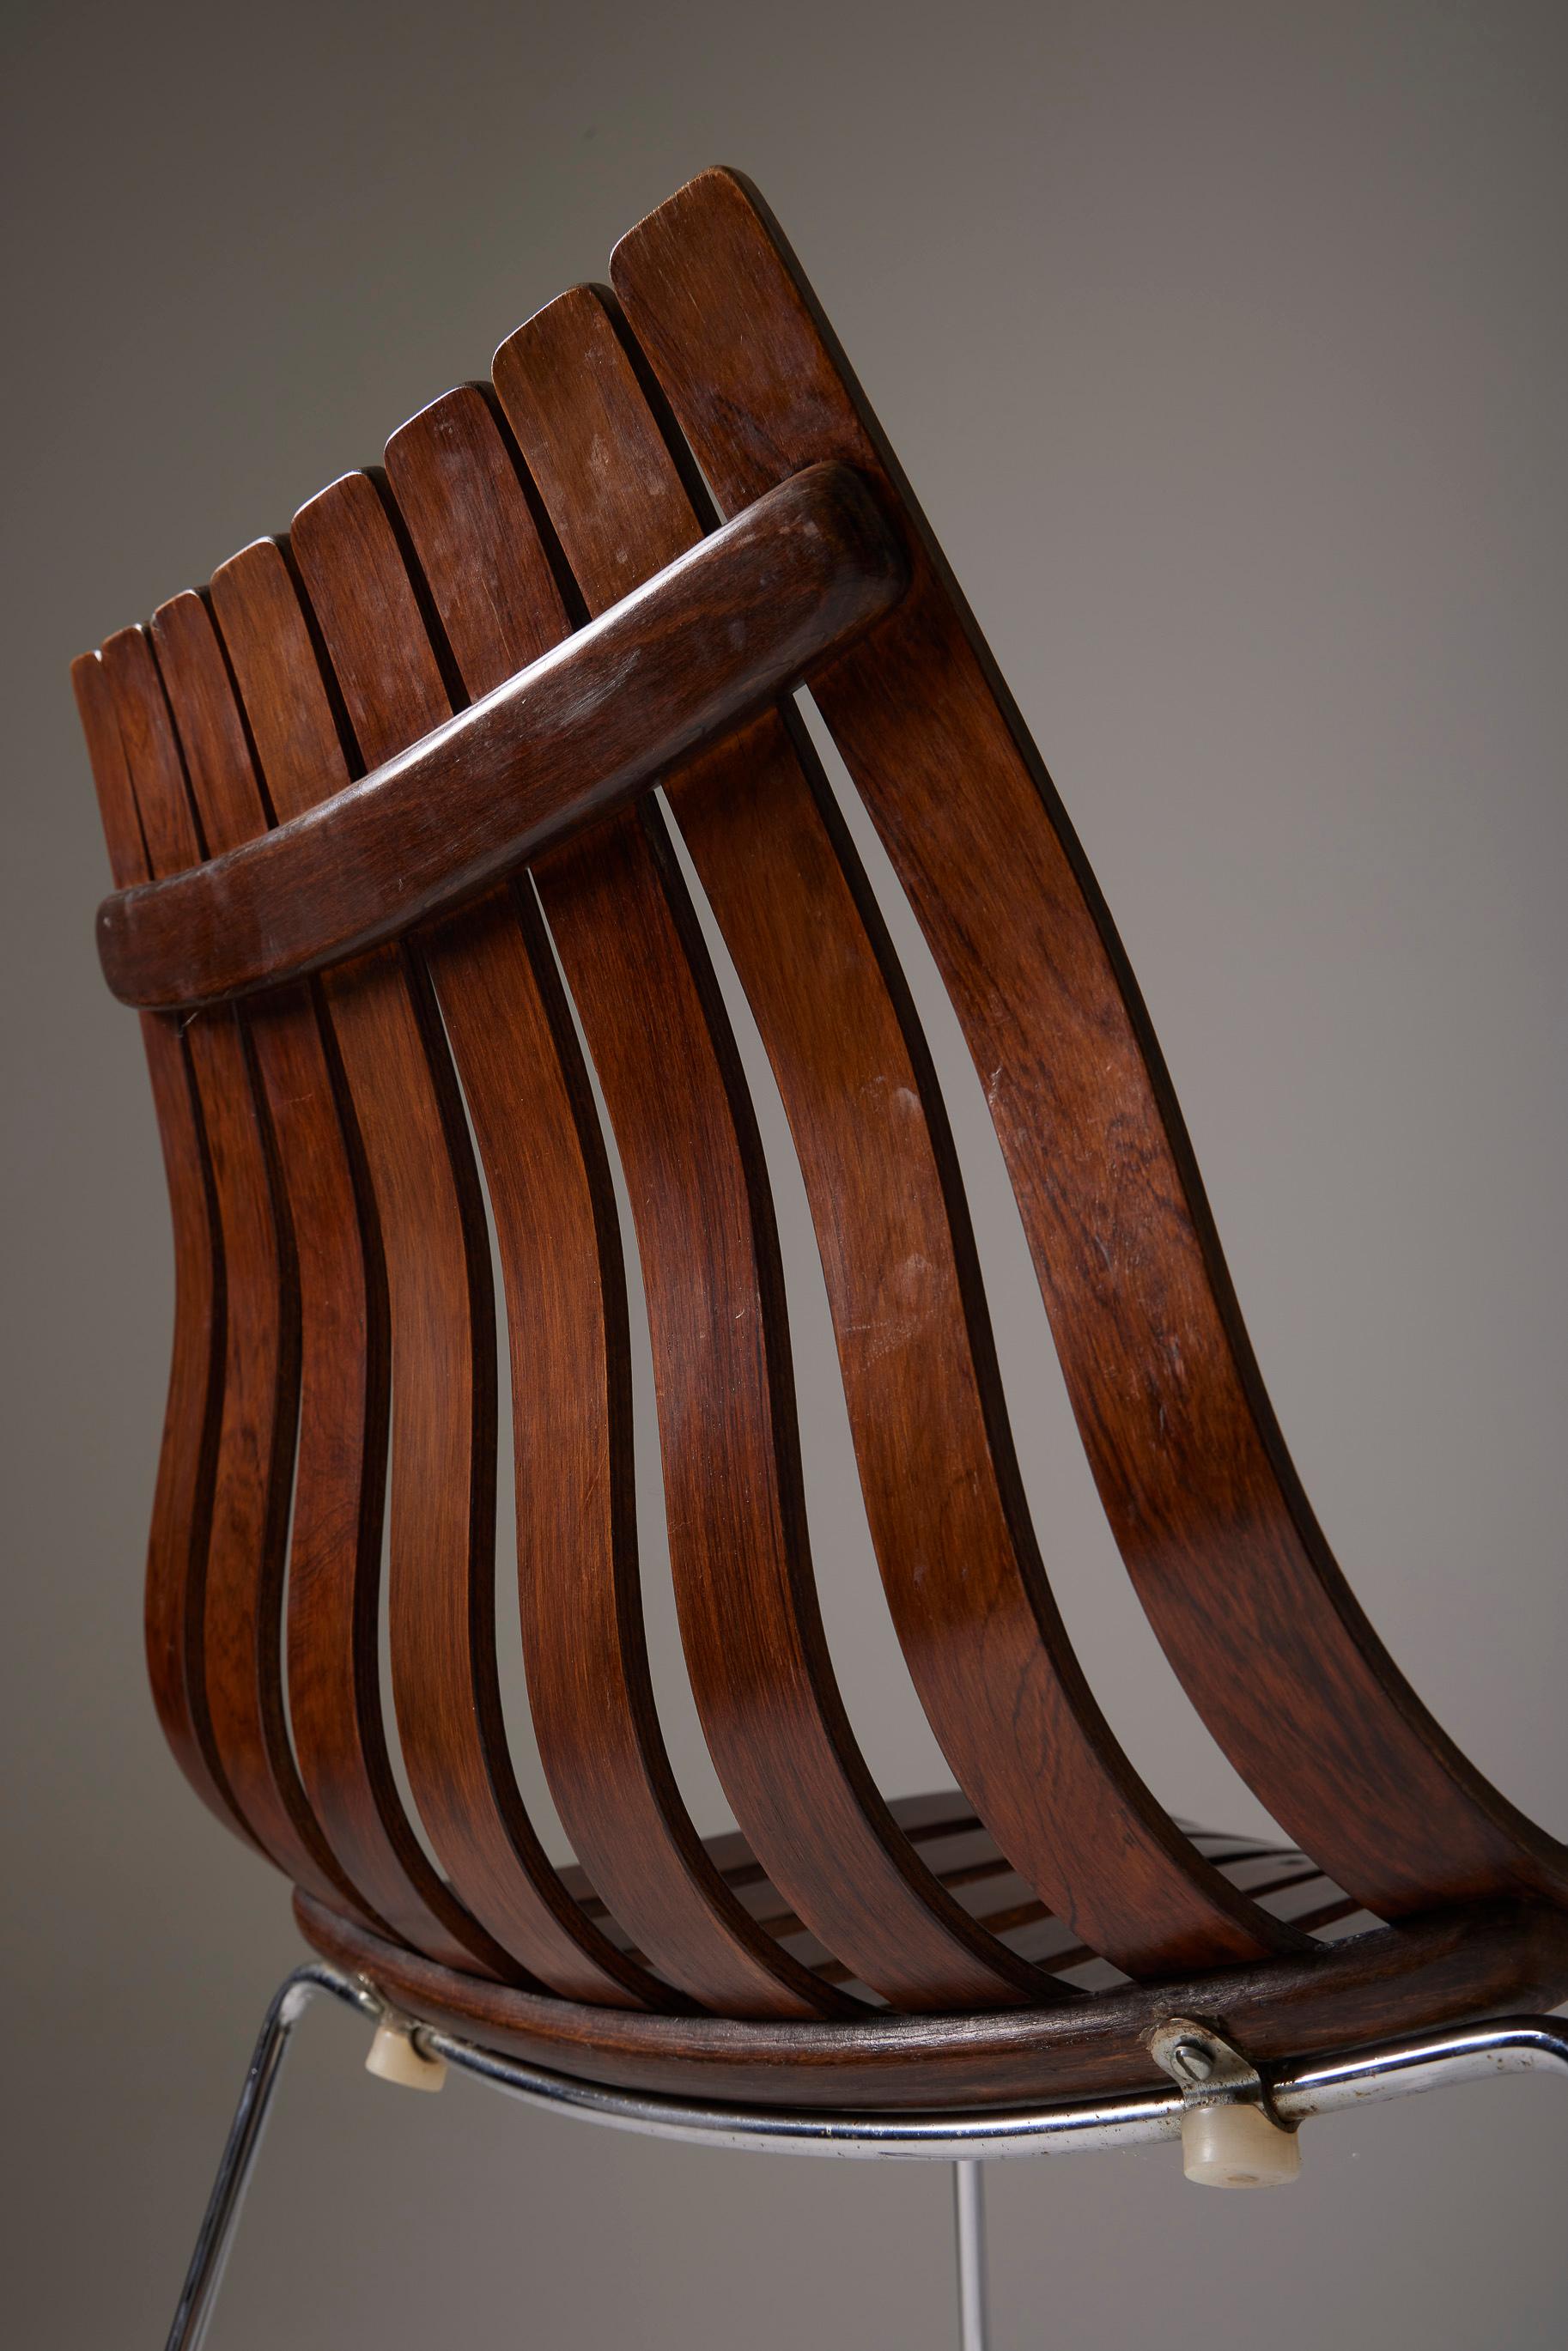  Set of 6 wooden chairs by Hans Brattrud For Sale 8